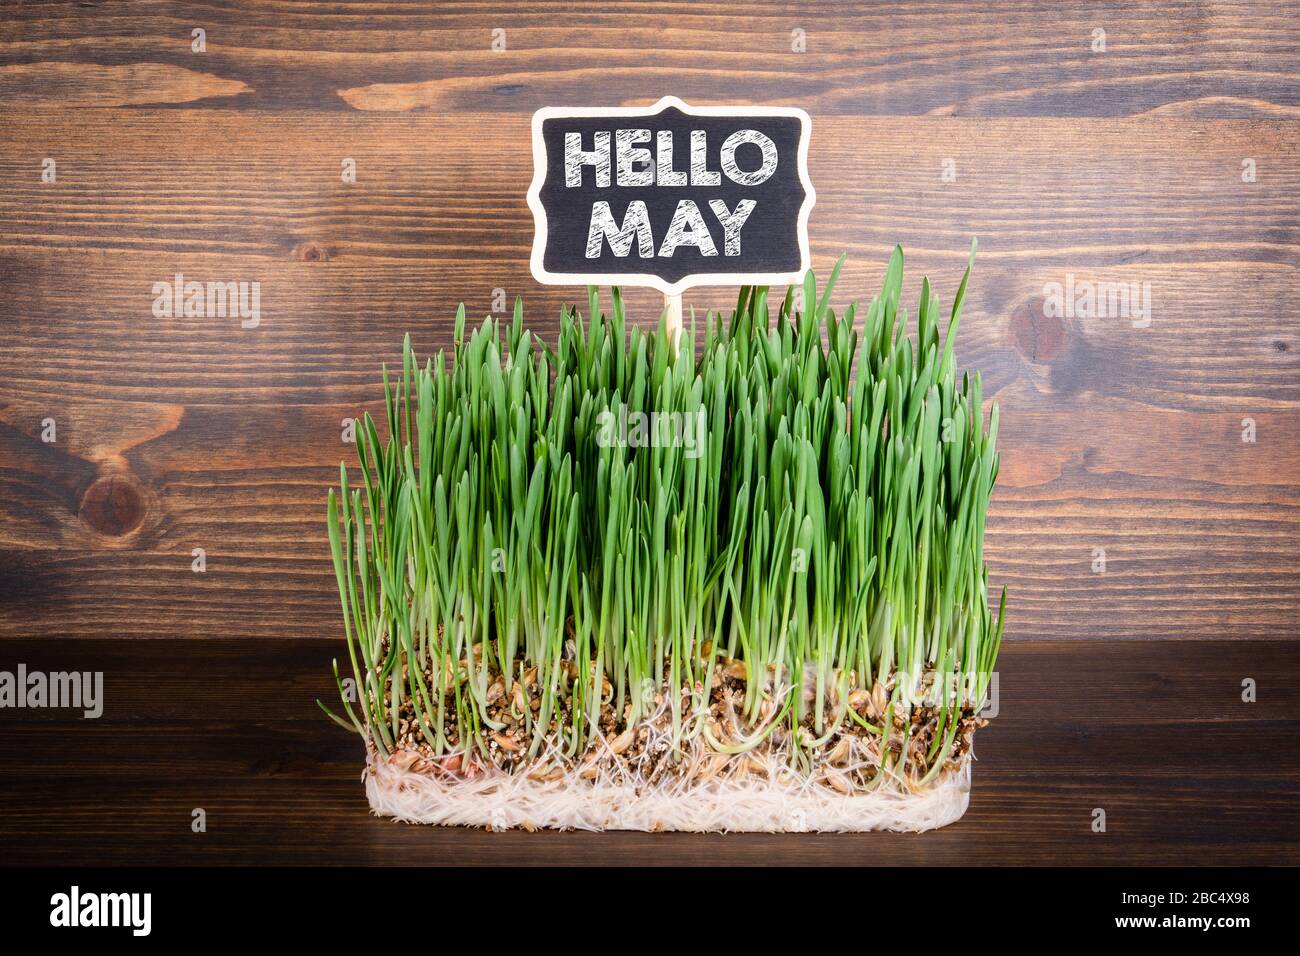 Hello May. Greetings and joy for spring. Green grass and chalk board Stock Photo